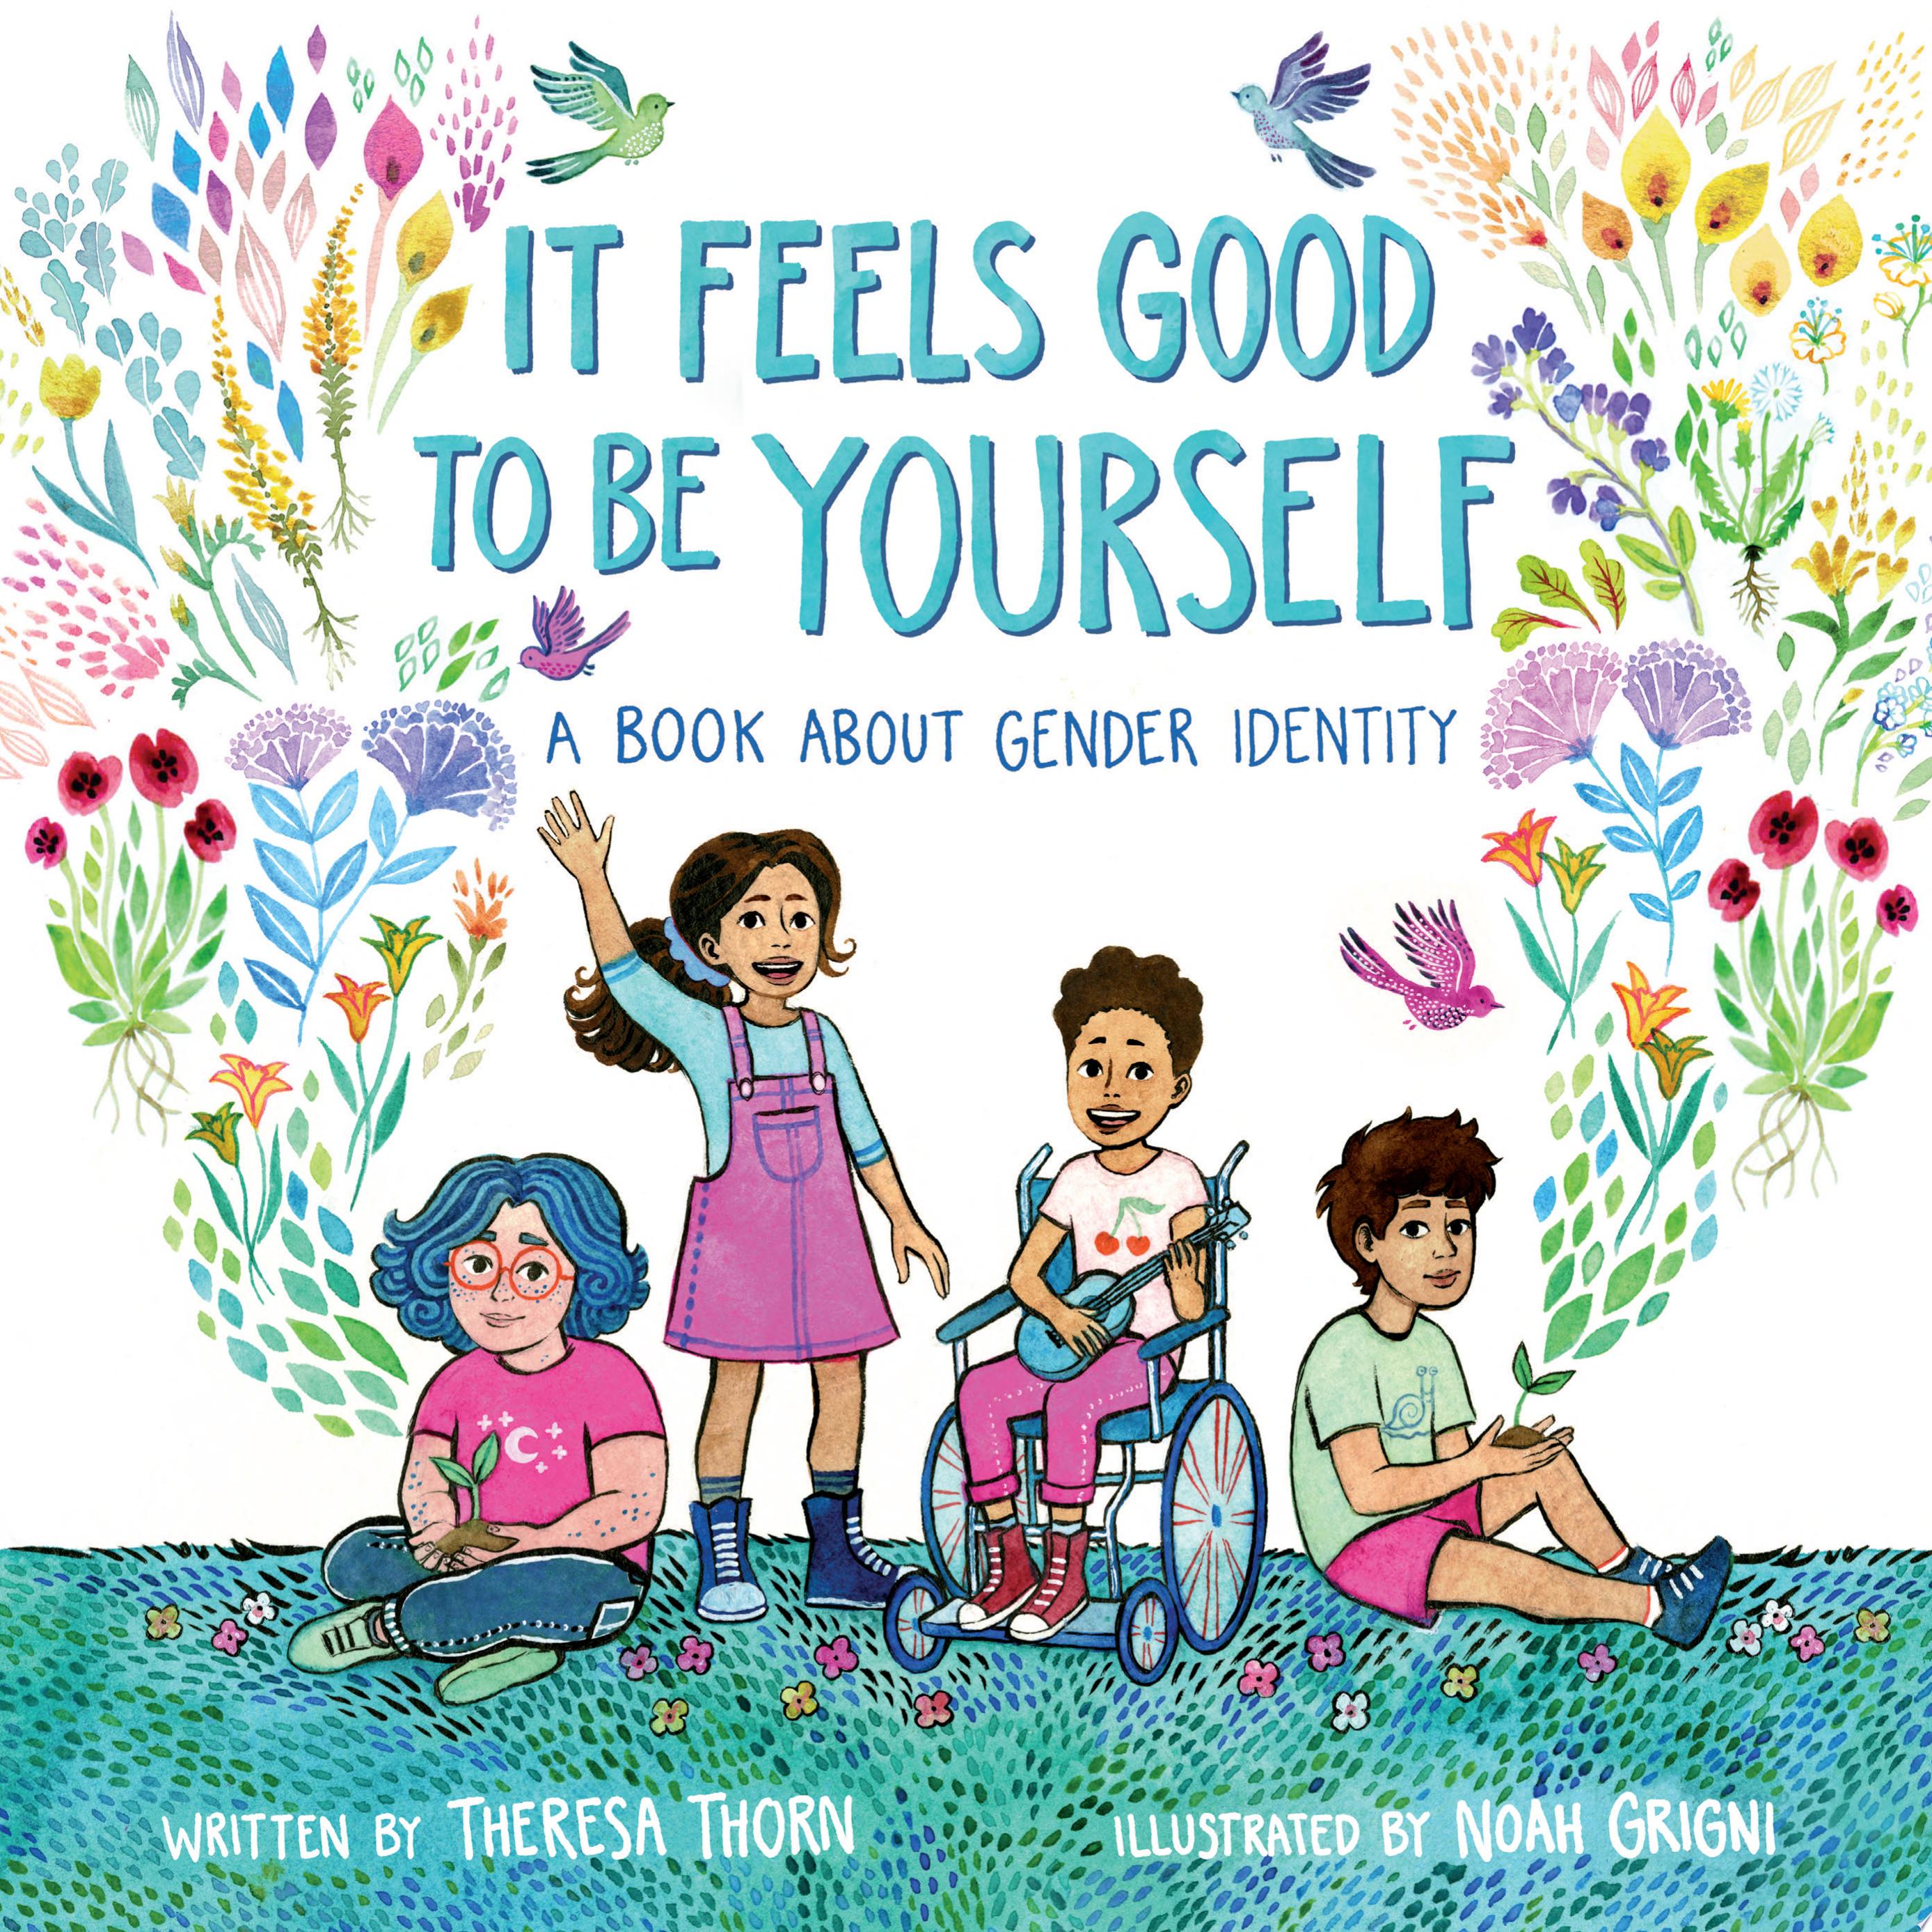 Image for "It Feels Good to Be Yourself"